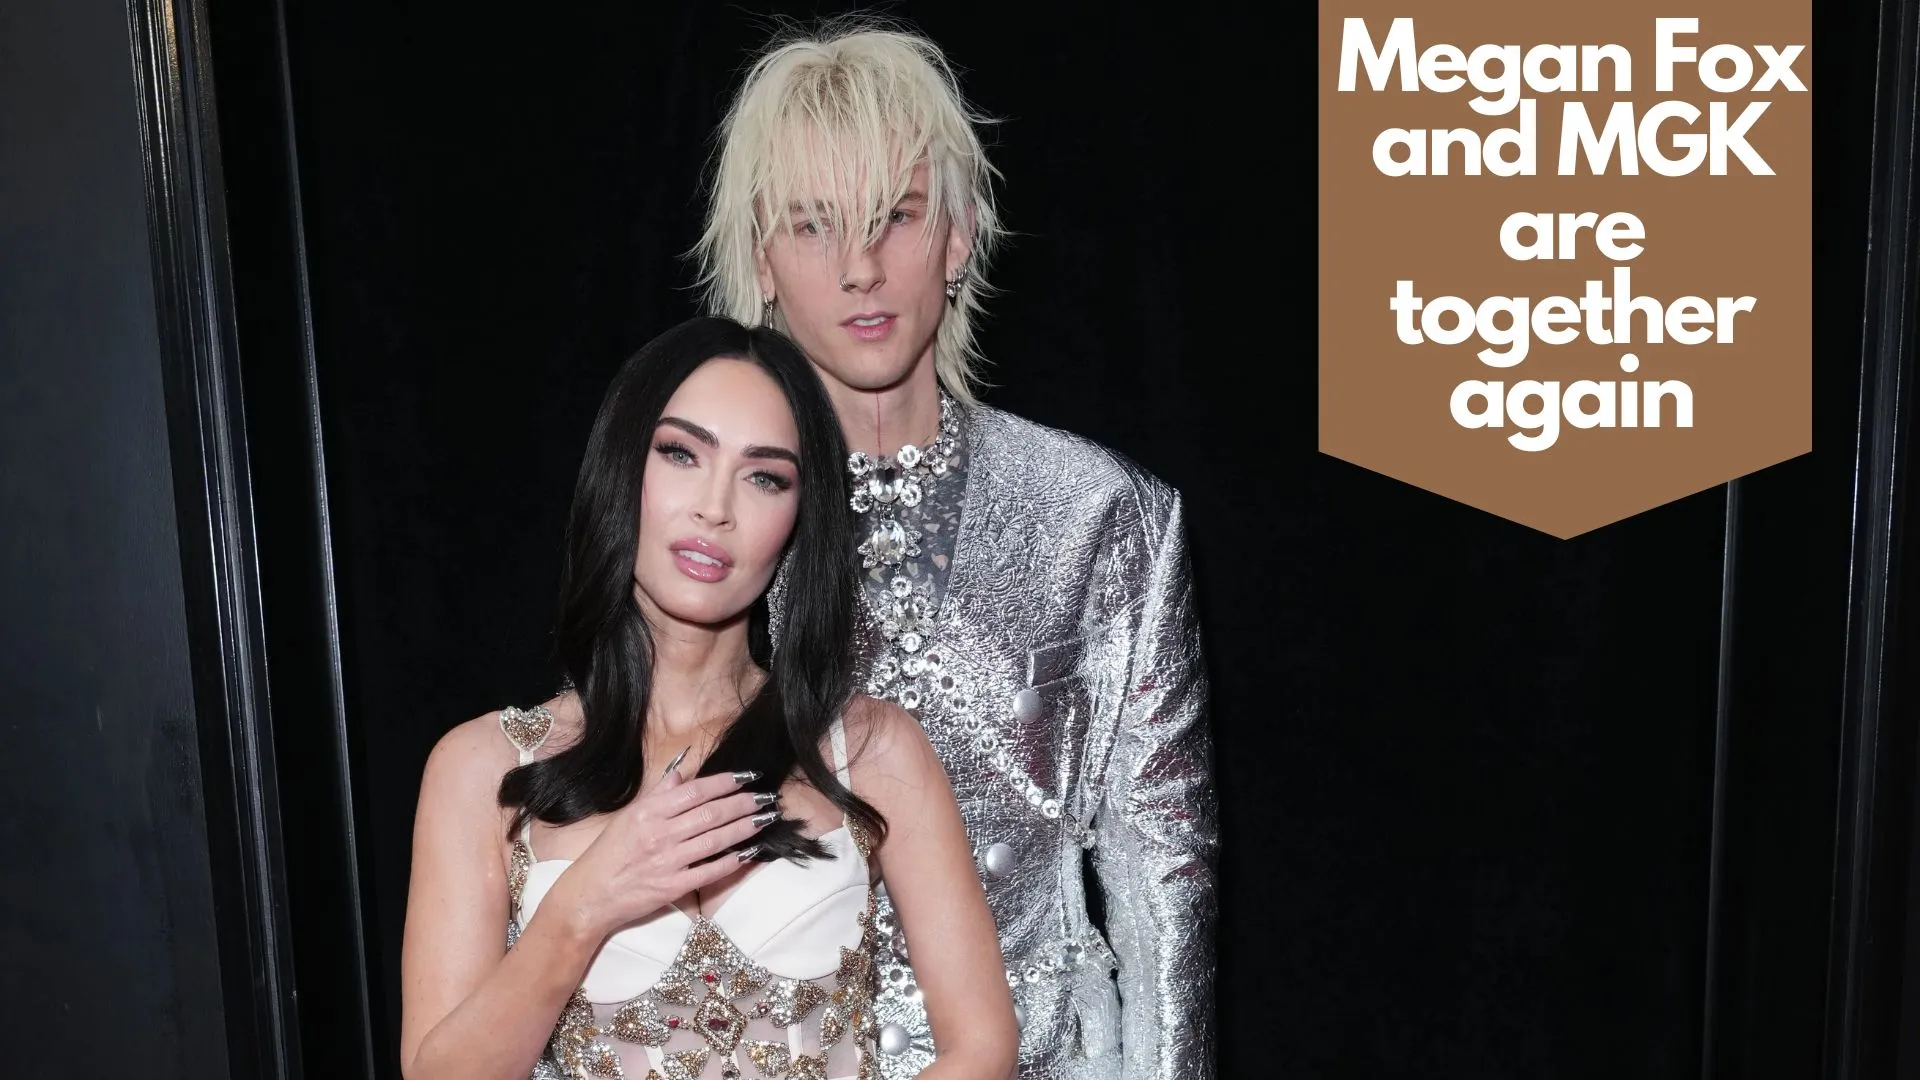 Megan Fox and MGK are together again (Image credit: etonline)